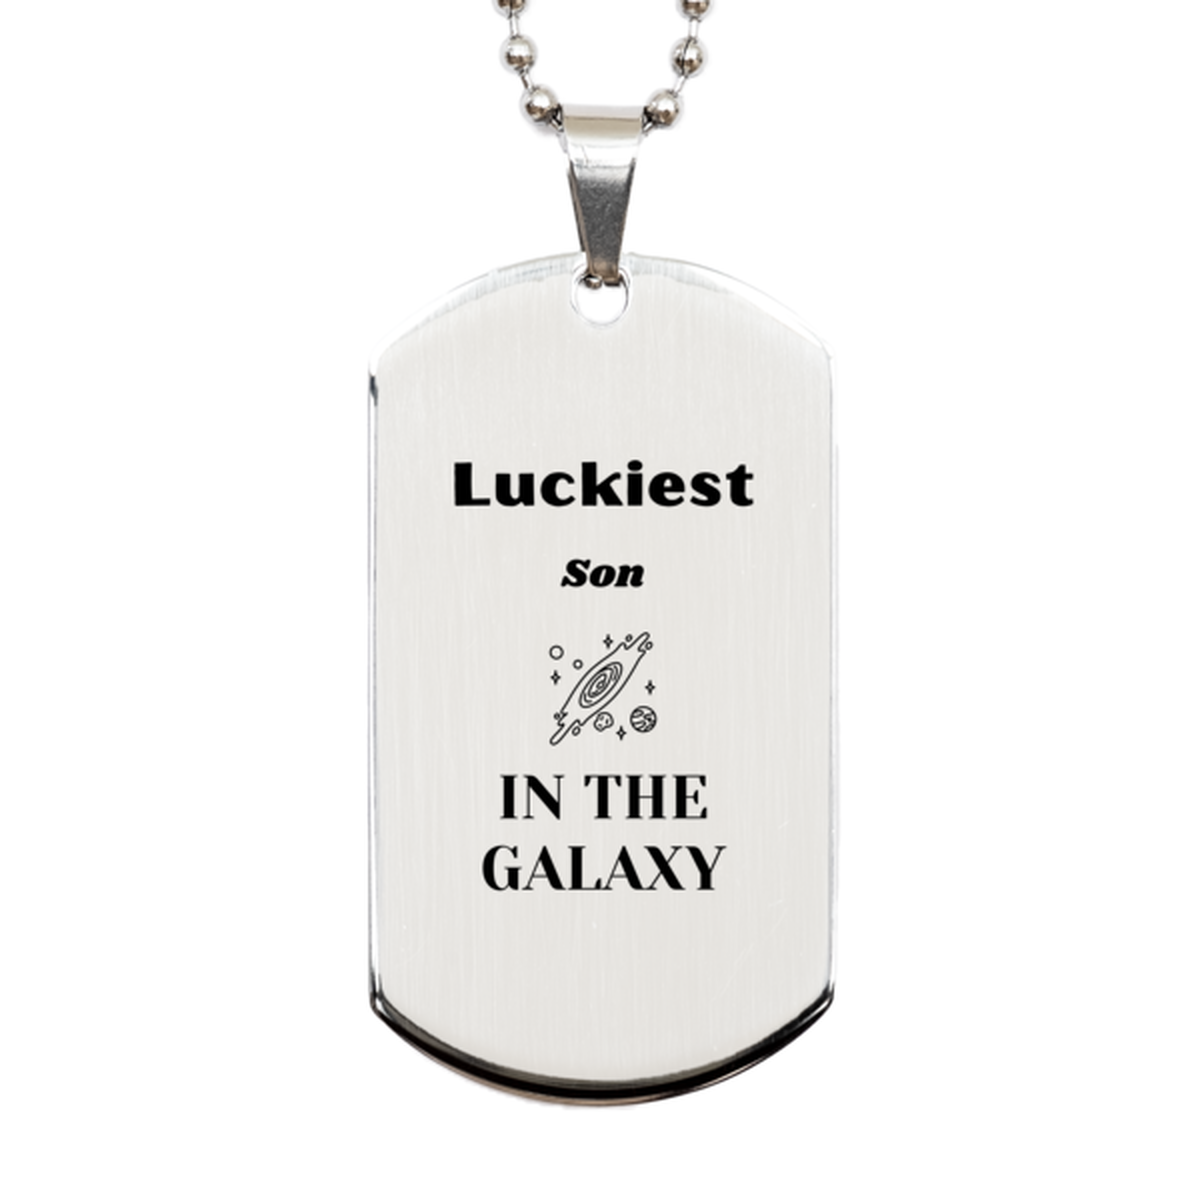 Luckiest Son in the Galaxy, To My Son Engraved Gifts, Christmas Son Silver Dog Tag Gifts, X-mas Birthday Unique Gifts For Son Men Women